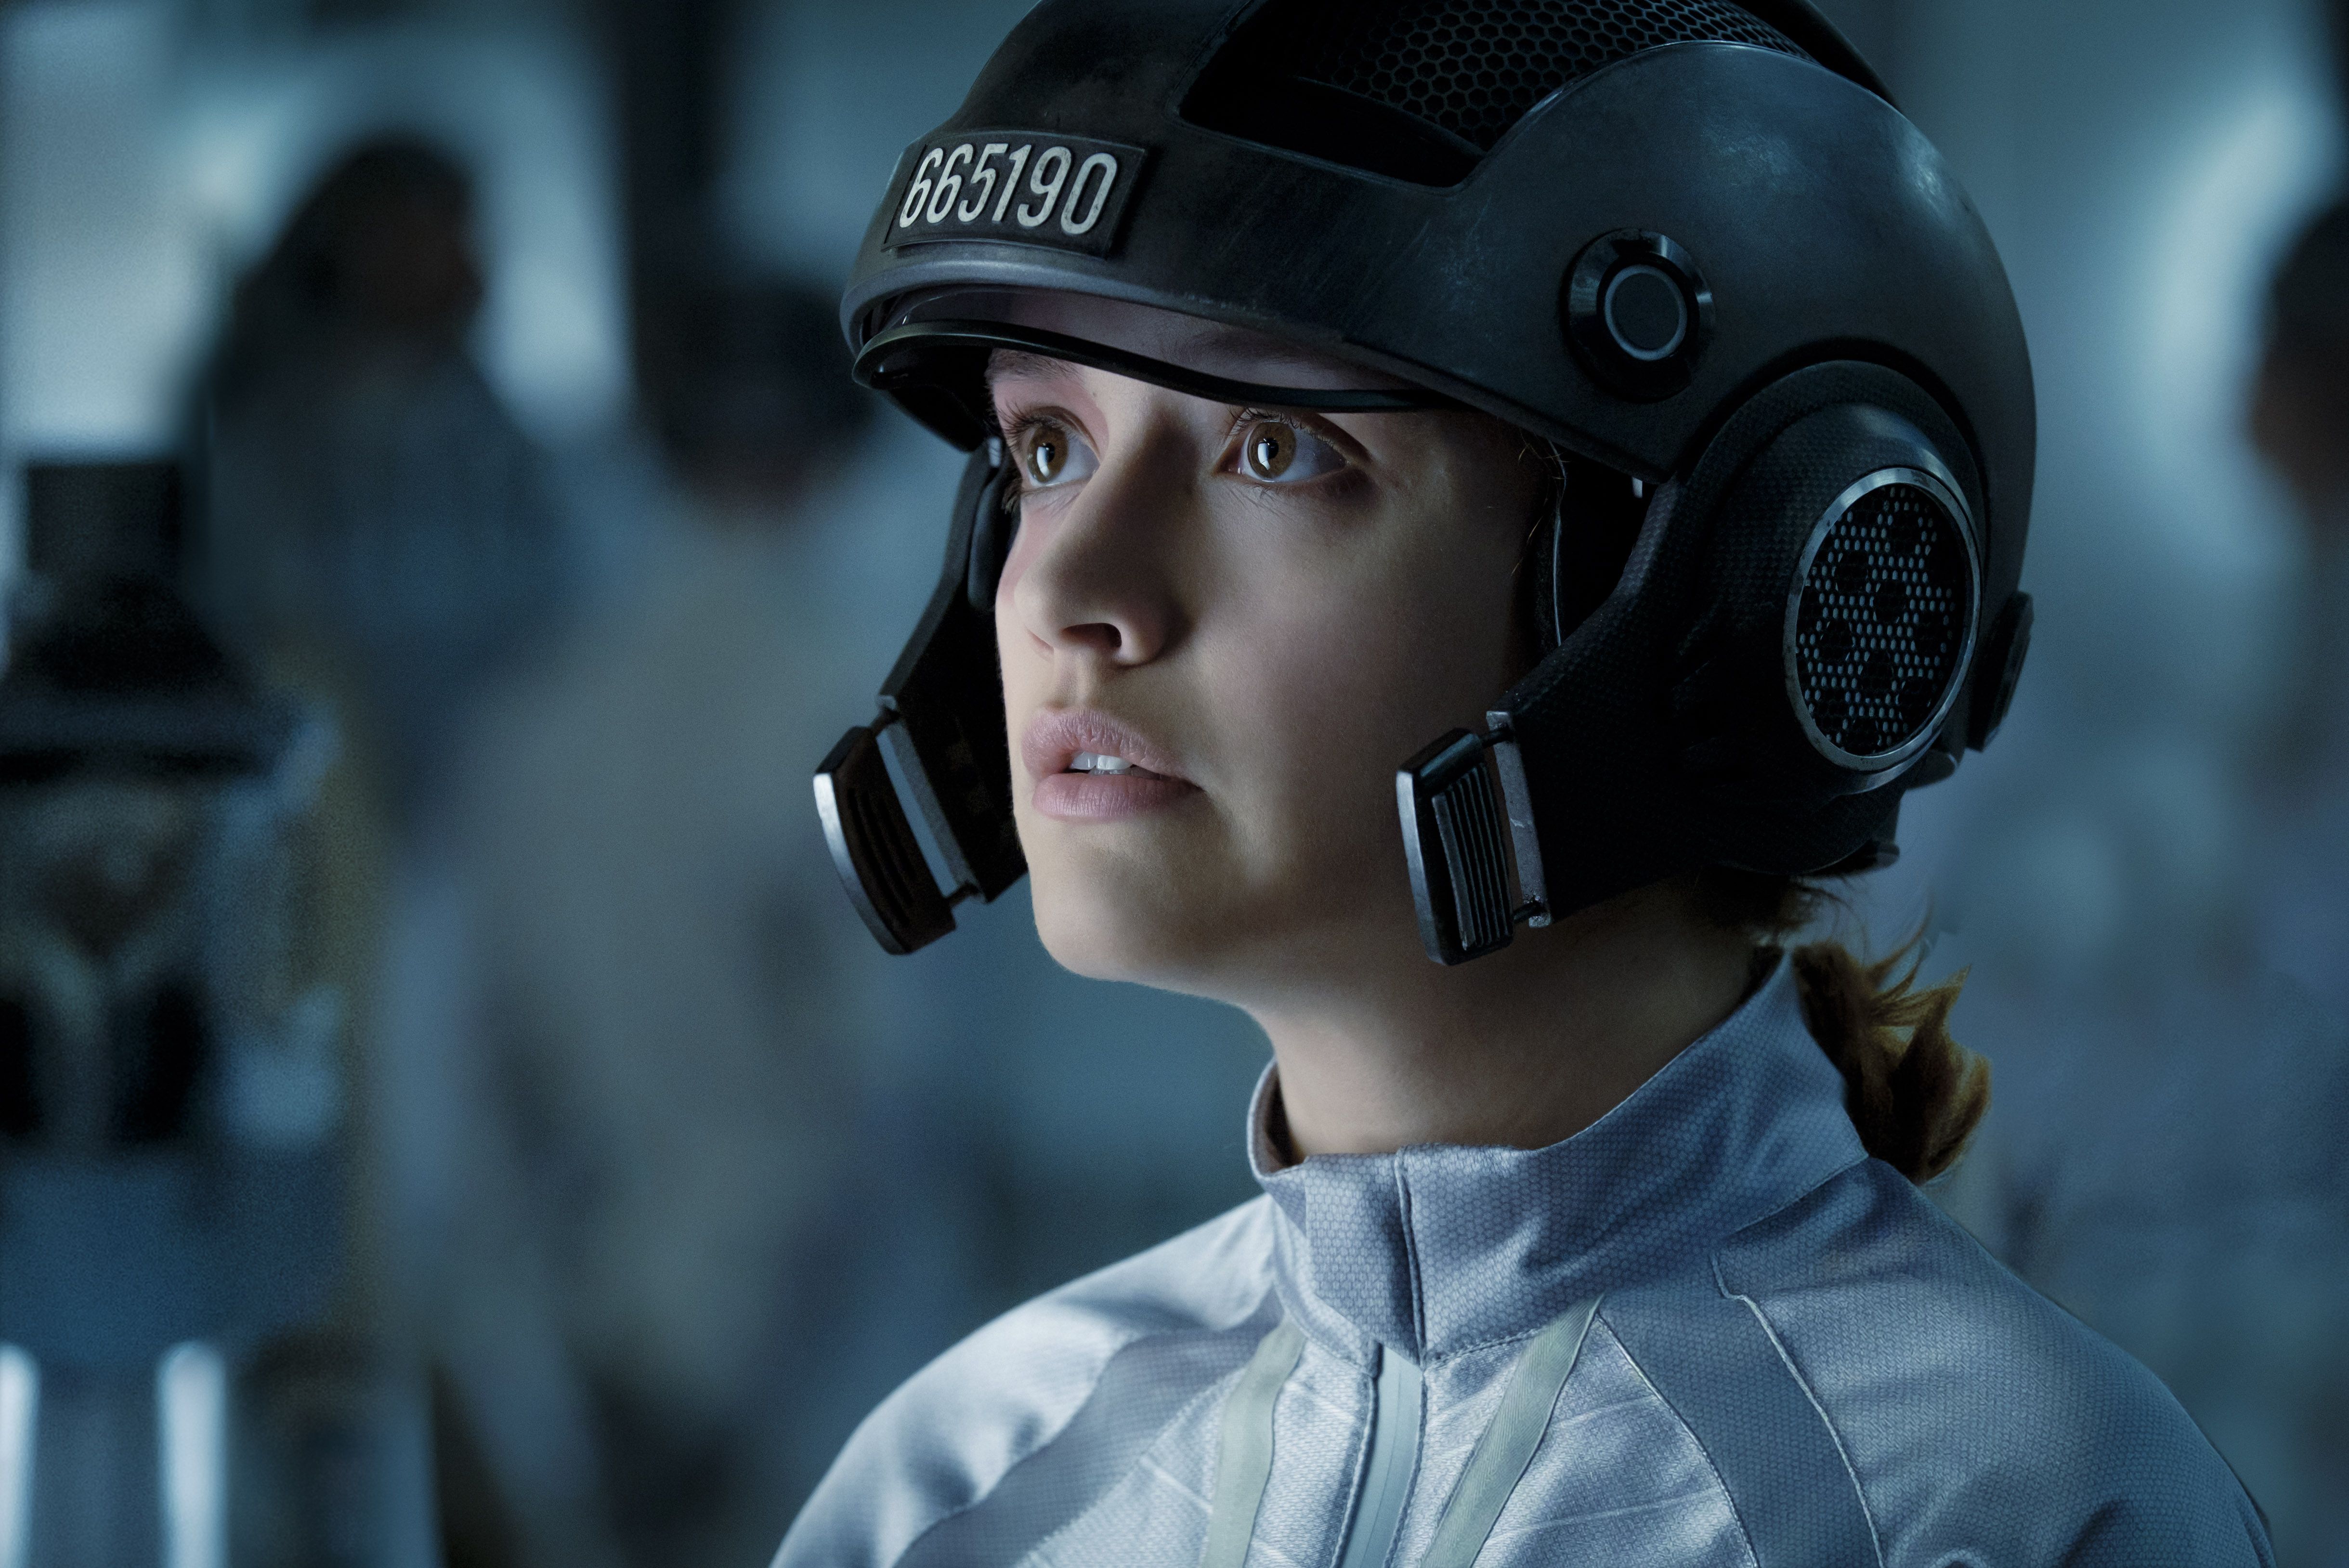 Olivia Cooke In Ready Player One, HD Movies, 4k Wallpaper, Image